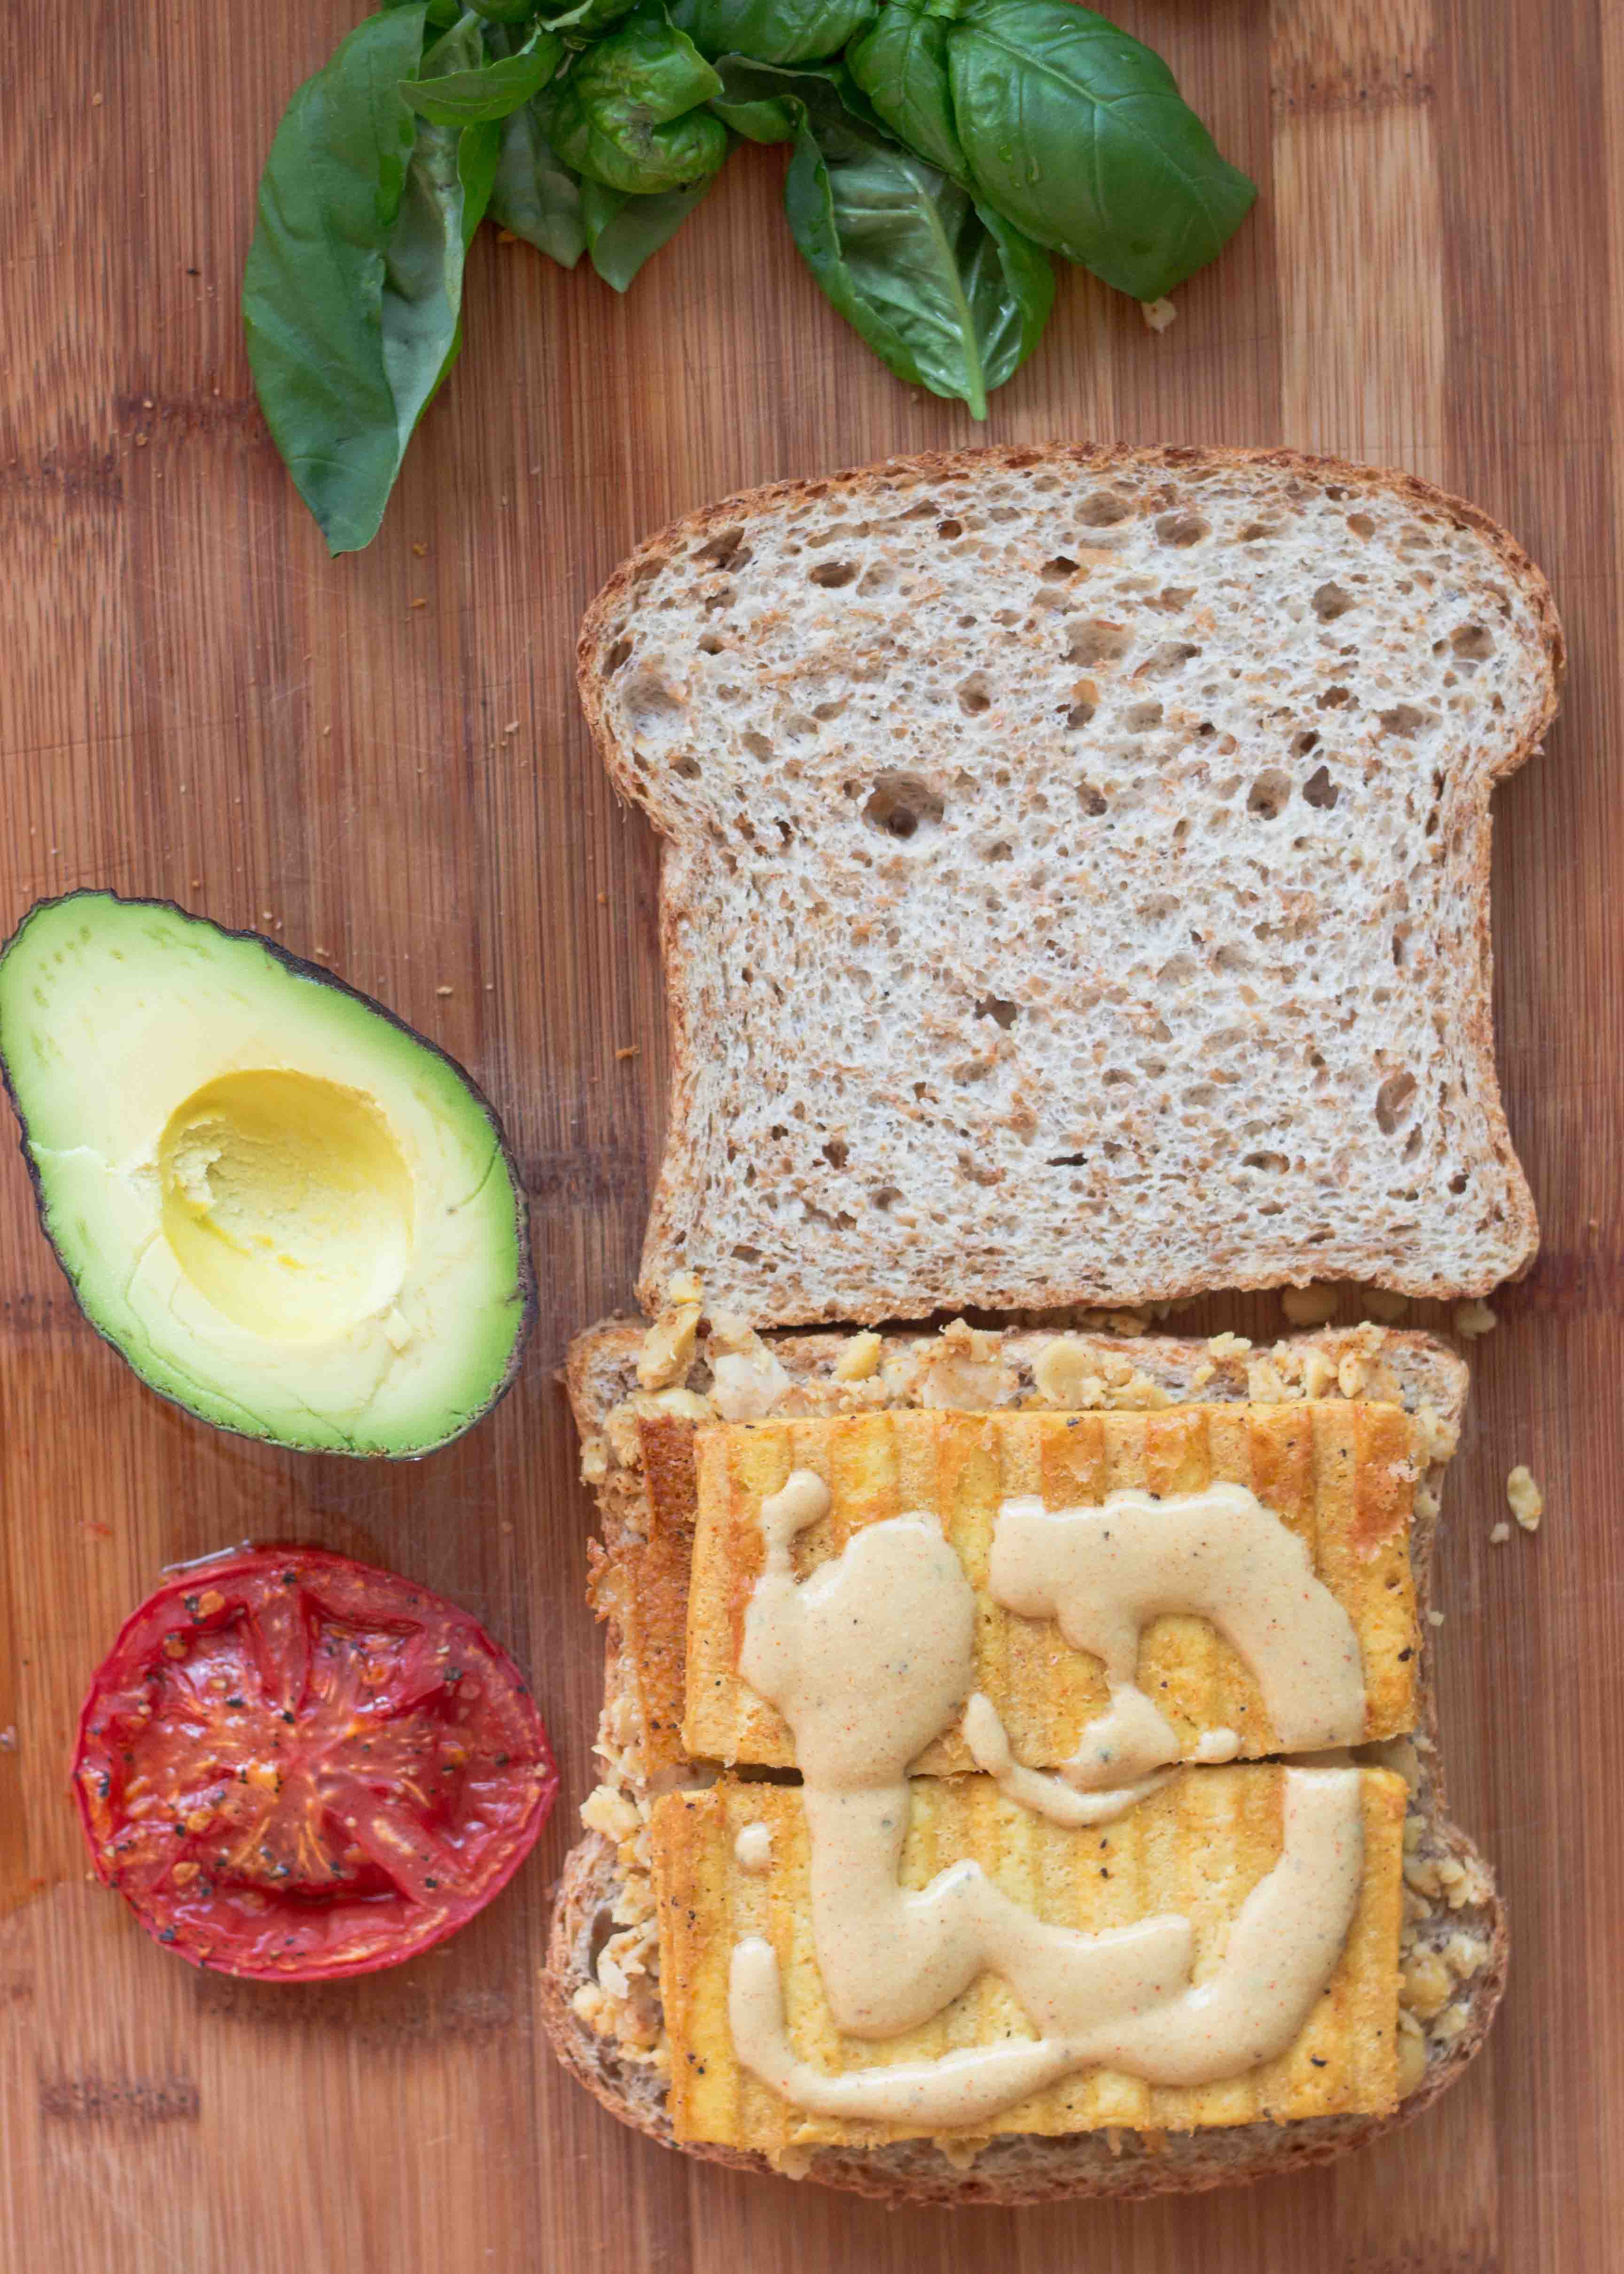 Smashed Chickpea, Avocado and Roasted Tomato Sandwich with "Cheesy" Tofu